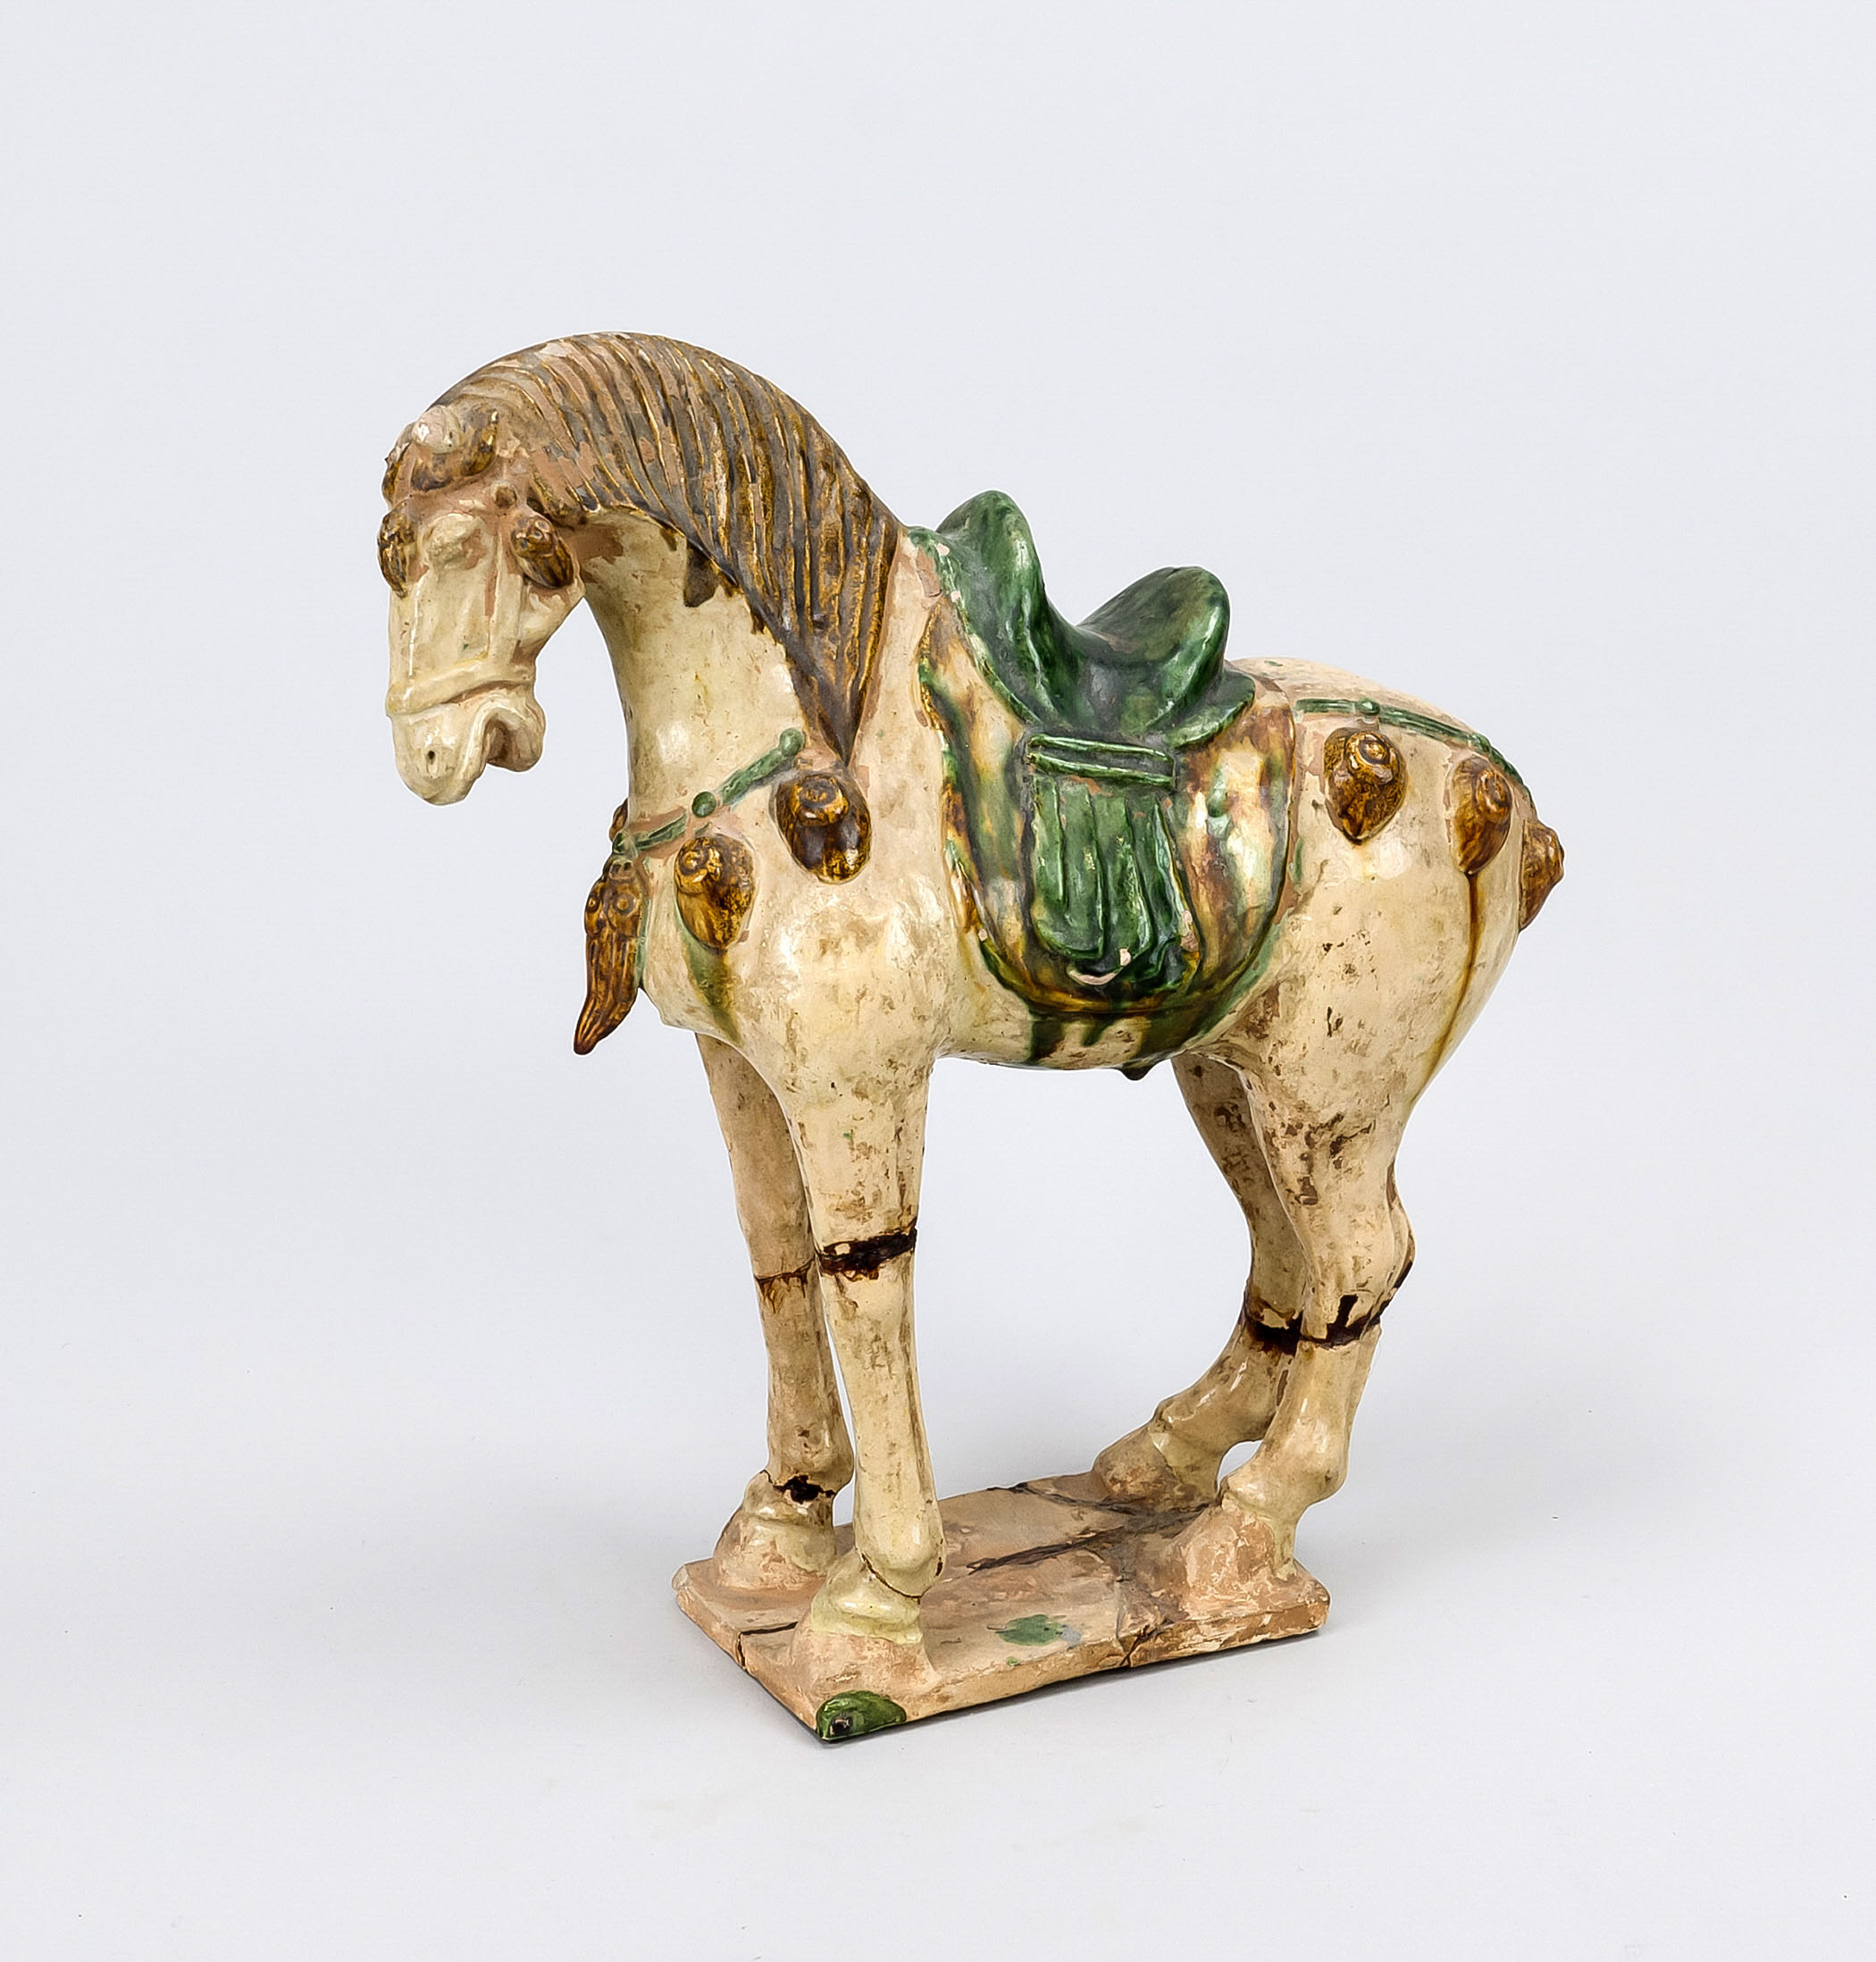 Horse, China, probably Tang dynasty. Earthenware with 3-color glaze (Sancai). Standing on a